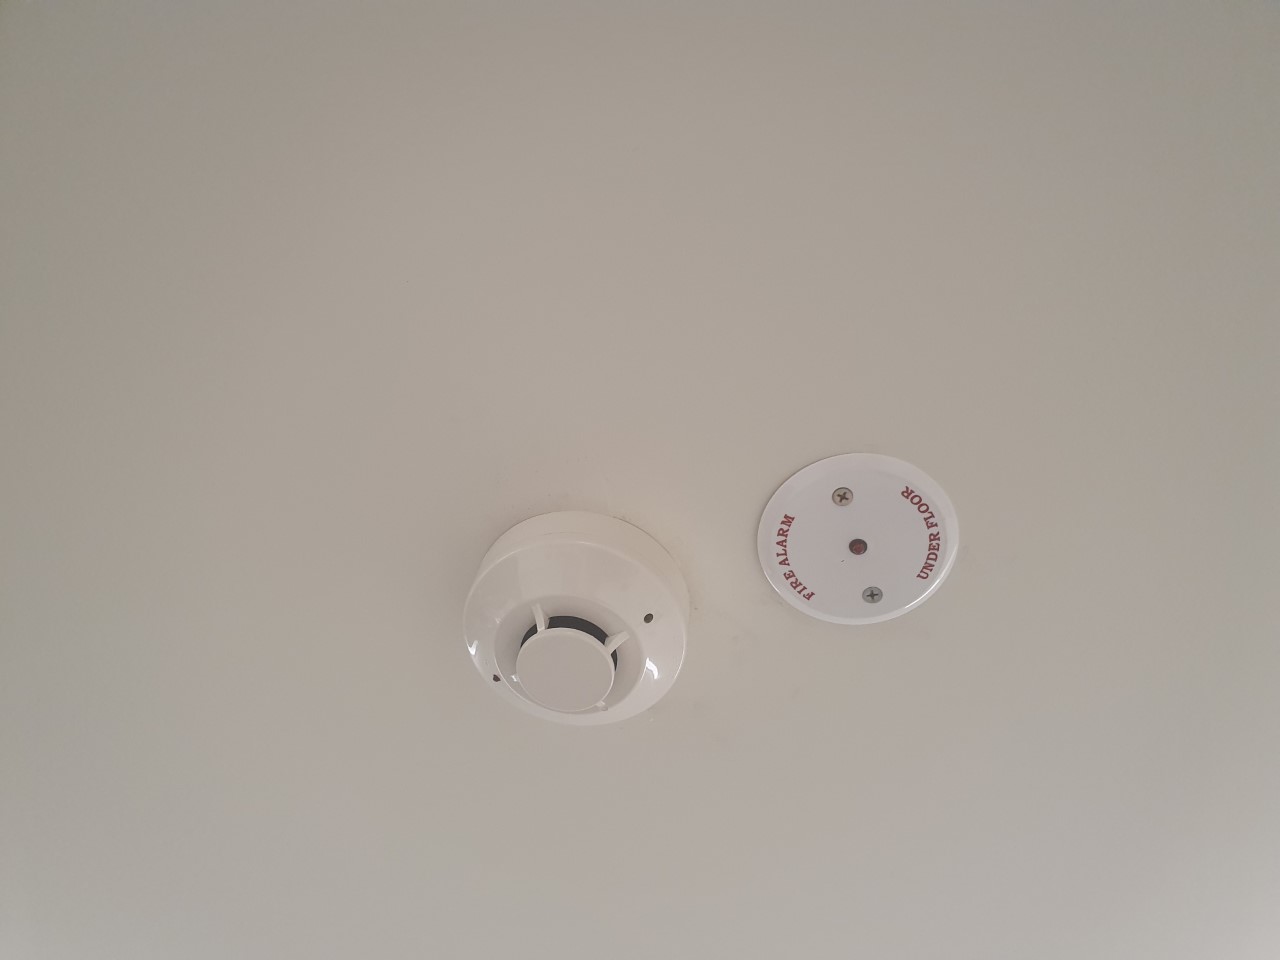 A well maintained smoke detector and concealed space indicator